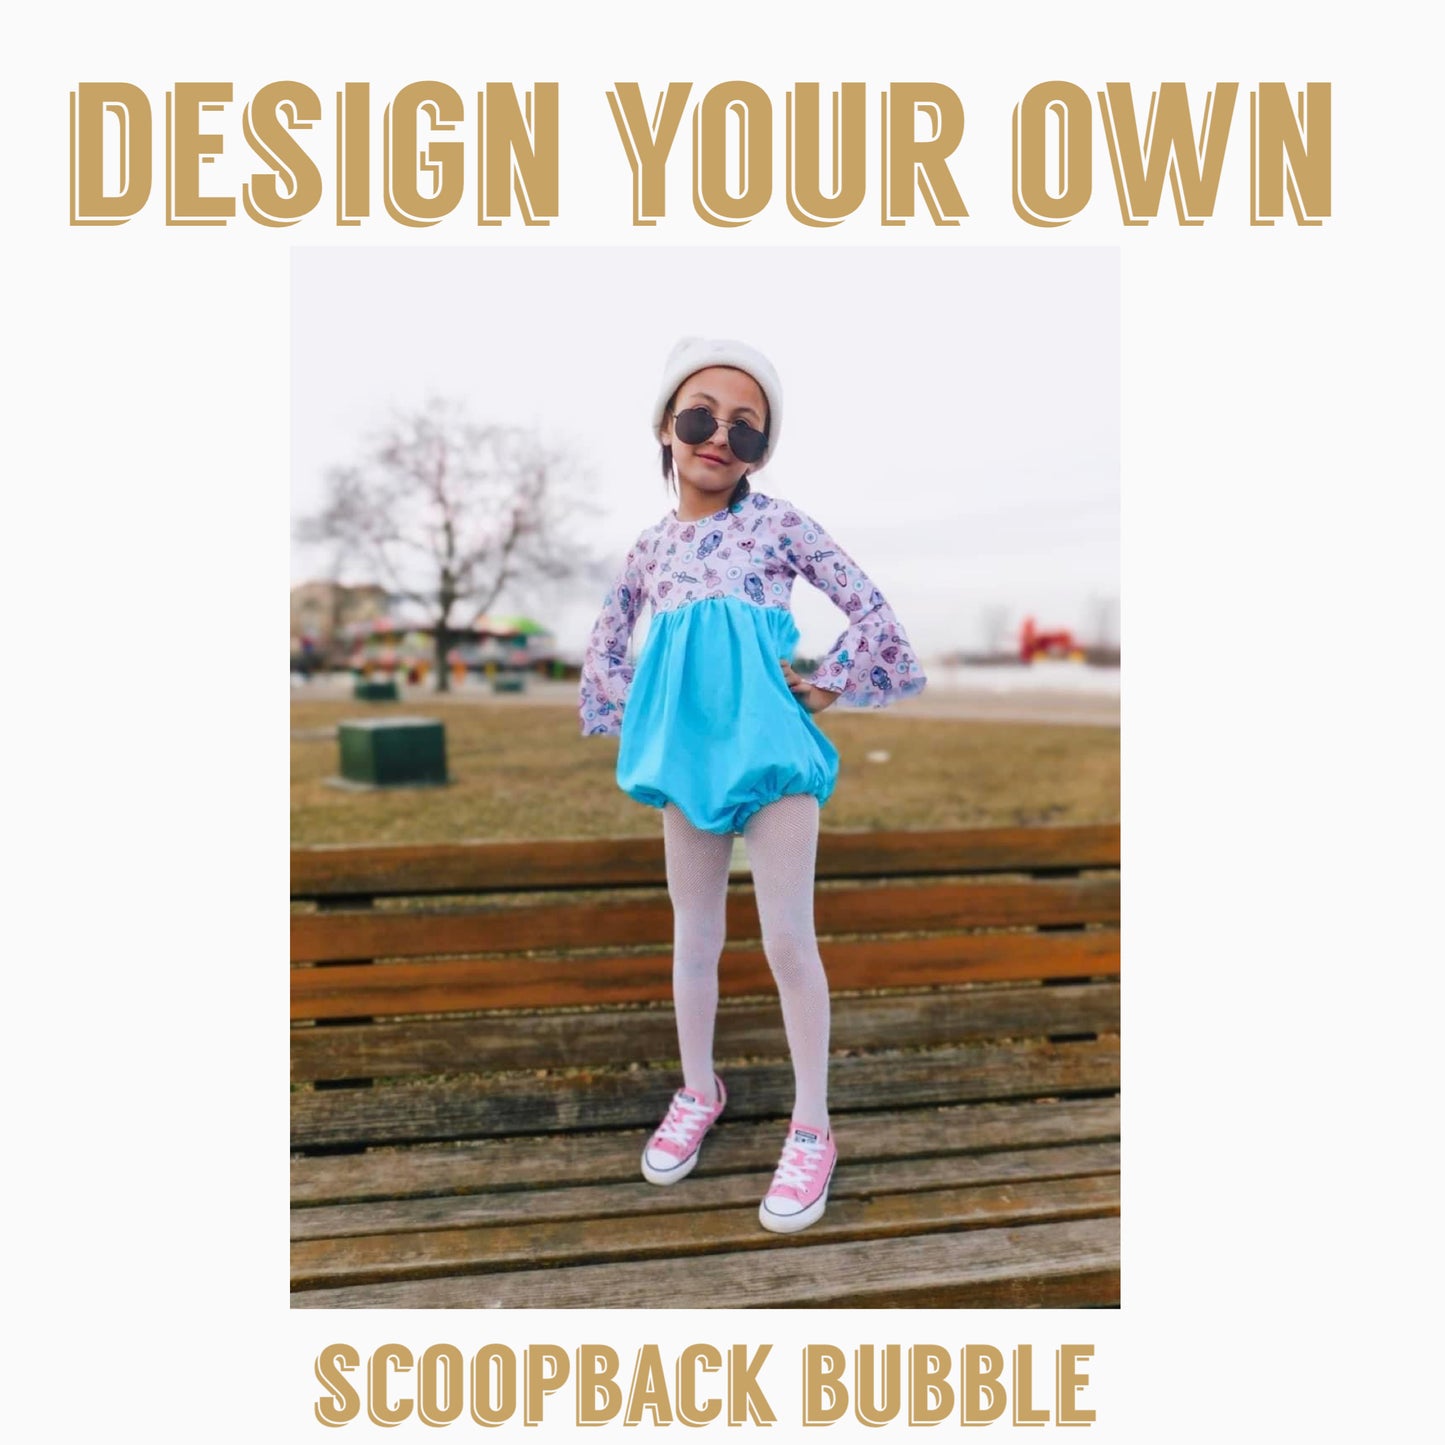 Design your own | Scoop back Bubble